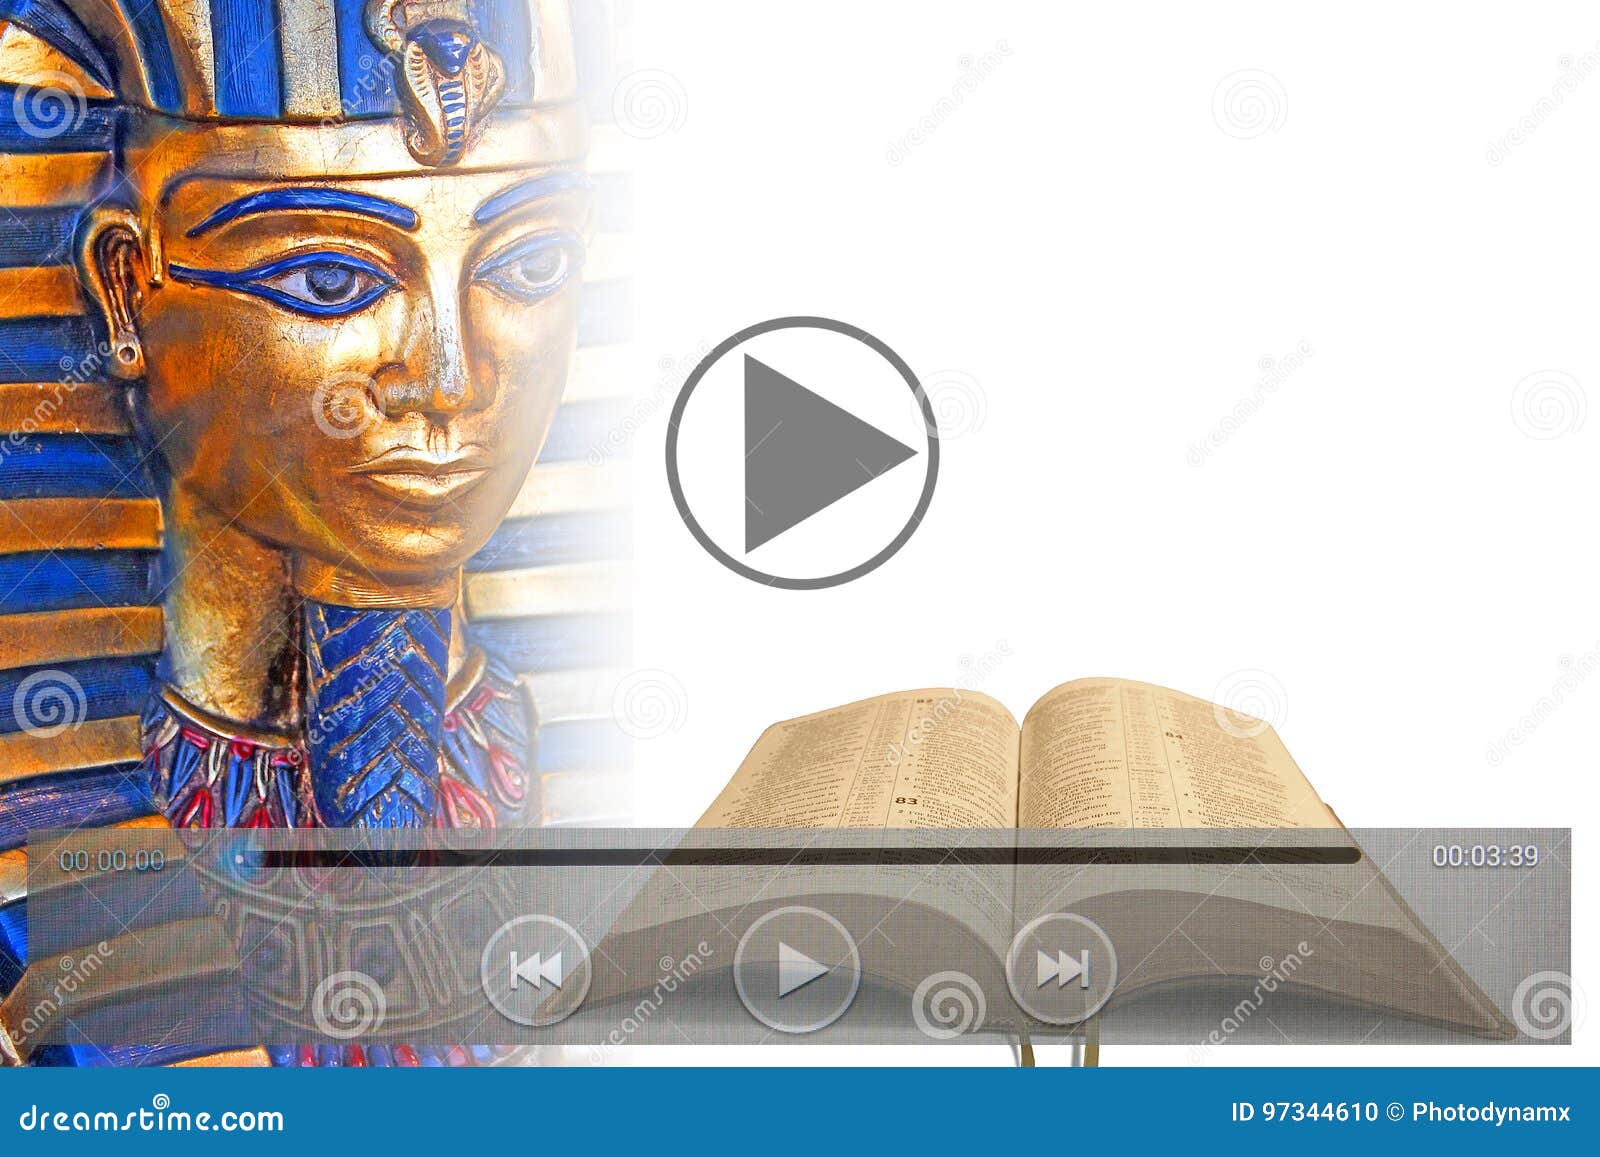 bible prophecy video on mobile tablet device